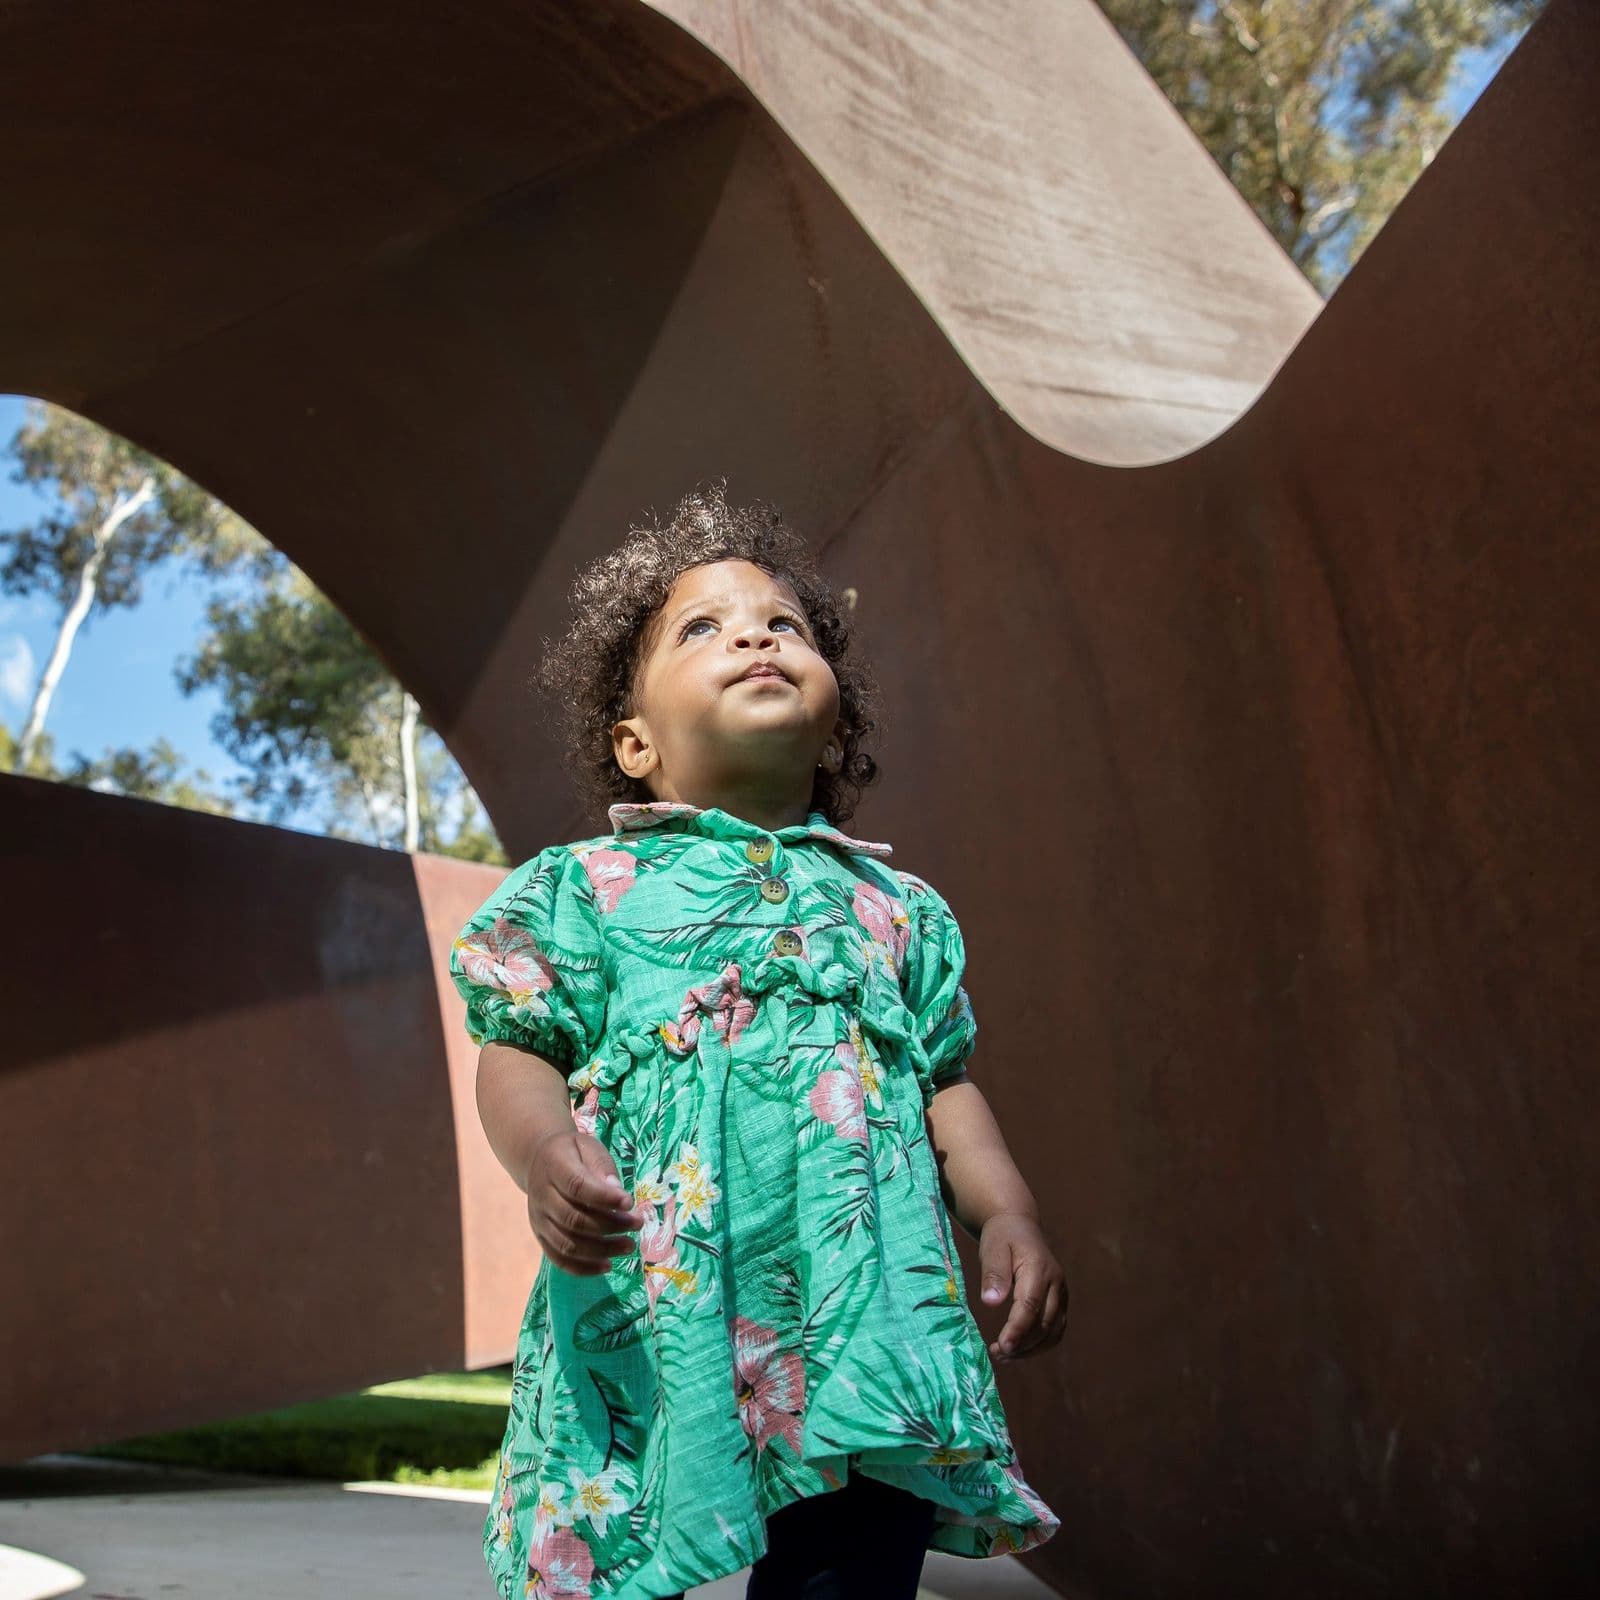 A toddler stands inside a large metal twisting sculpture